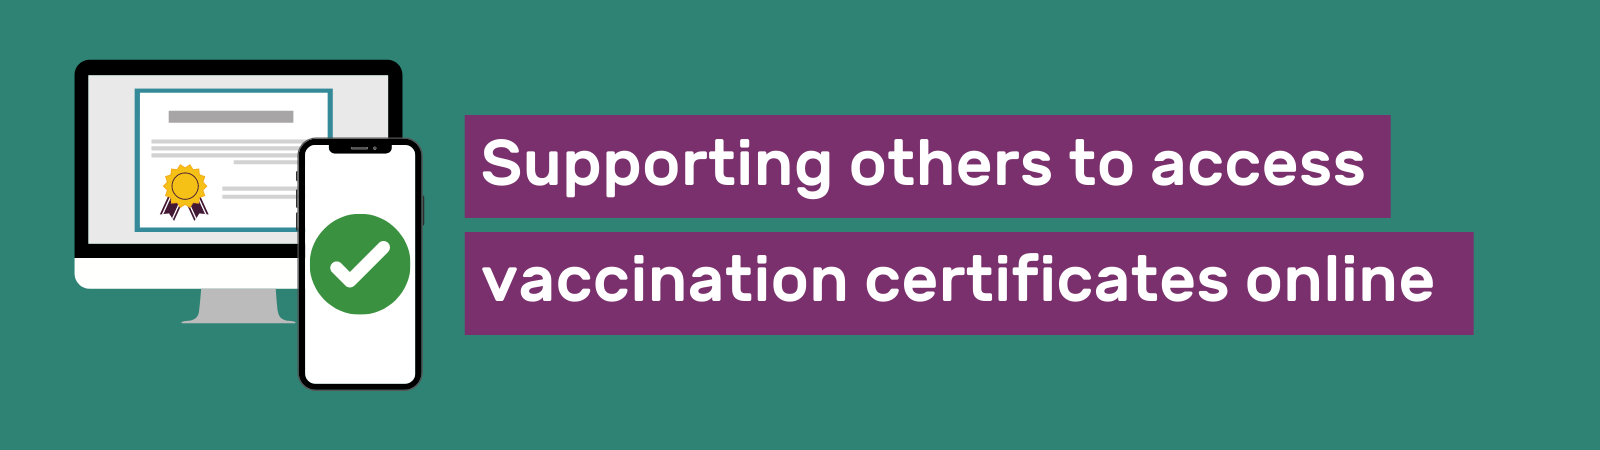 Supporting others to access vaccination certificates online